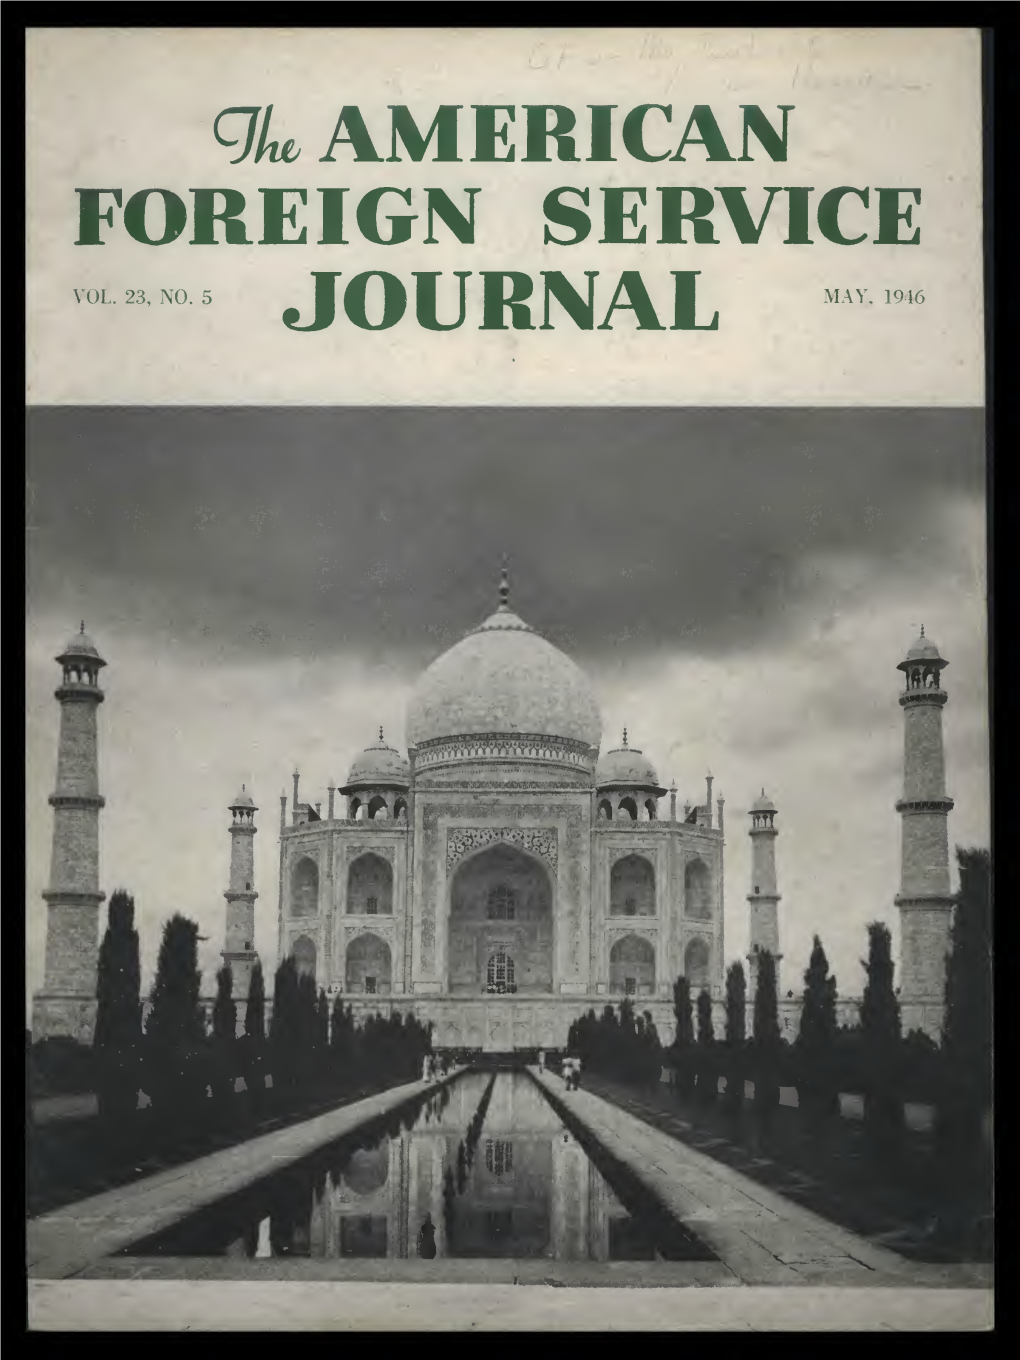 The Foreign Service Journal, May